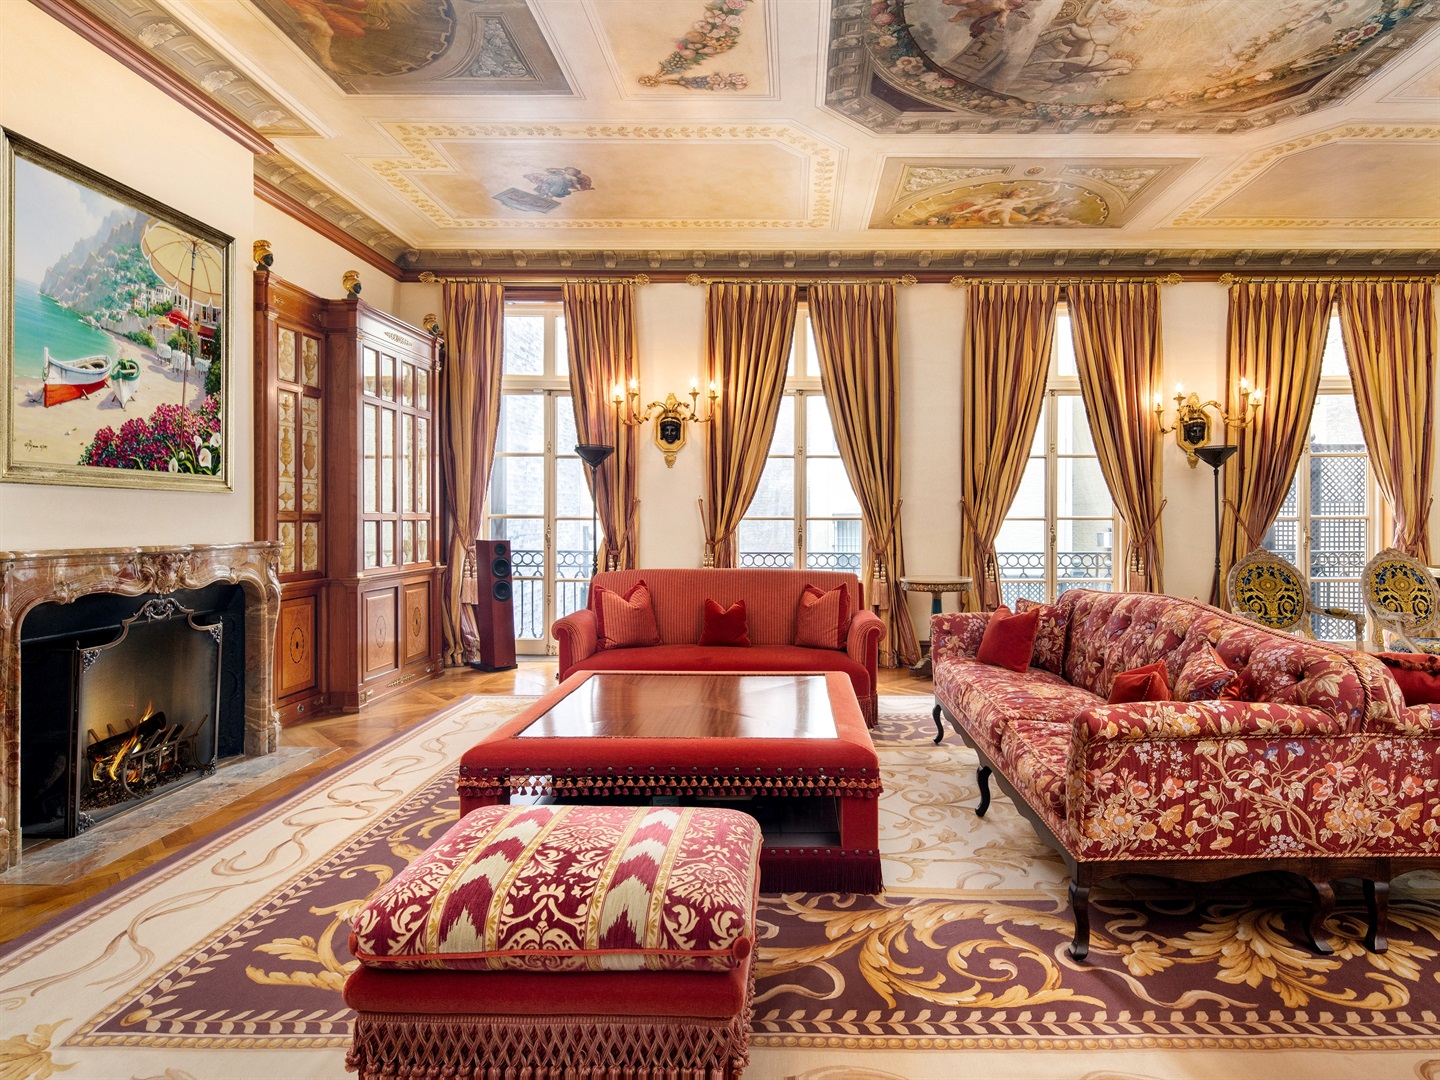 One of the mansion's living rooms. Travis Mark and Spotless Group/Sotheby’s International